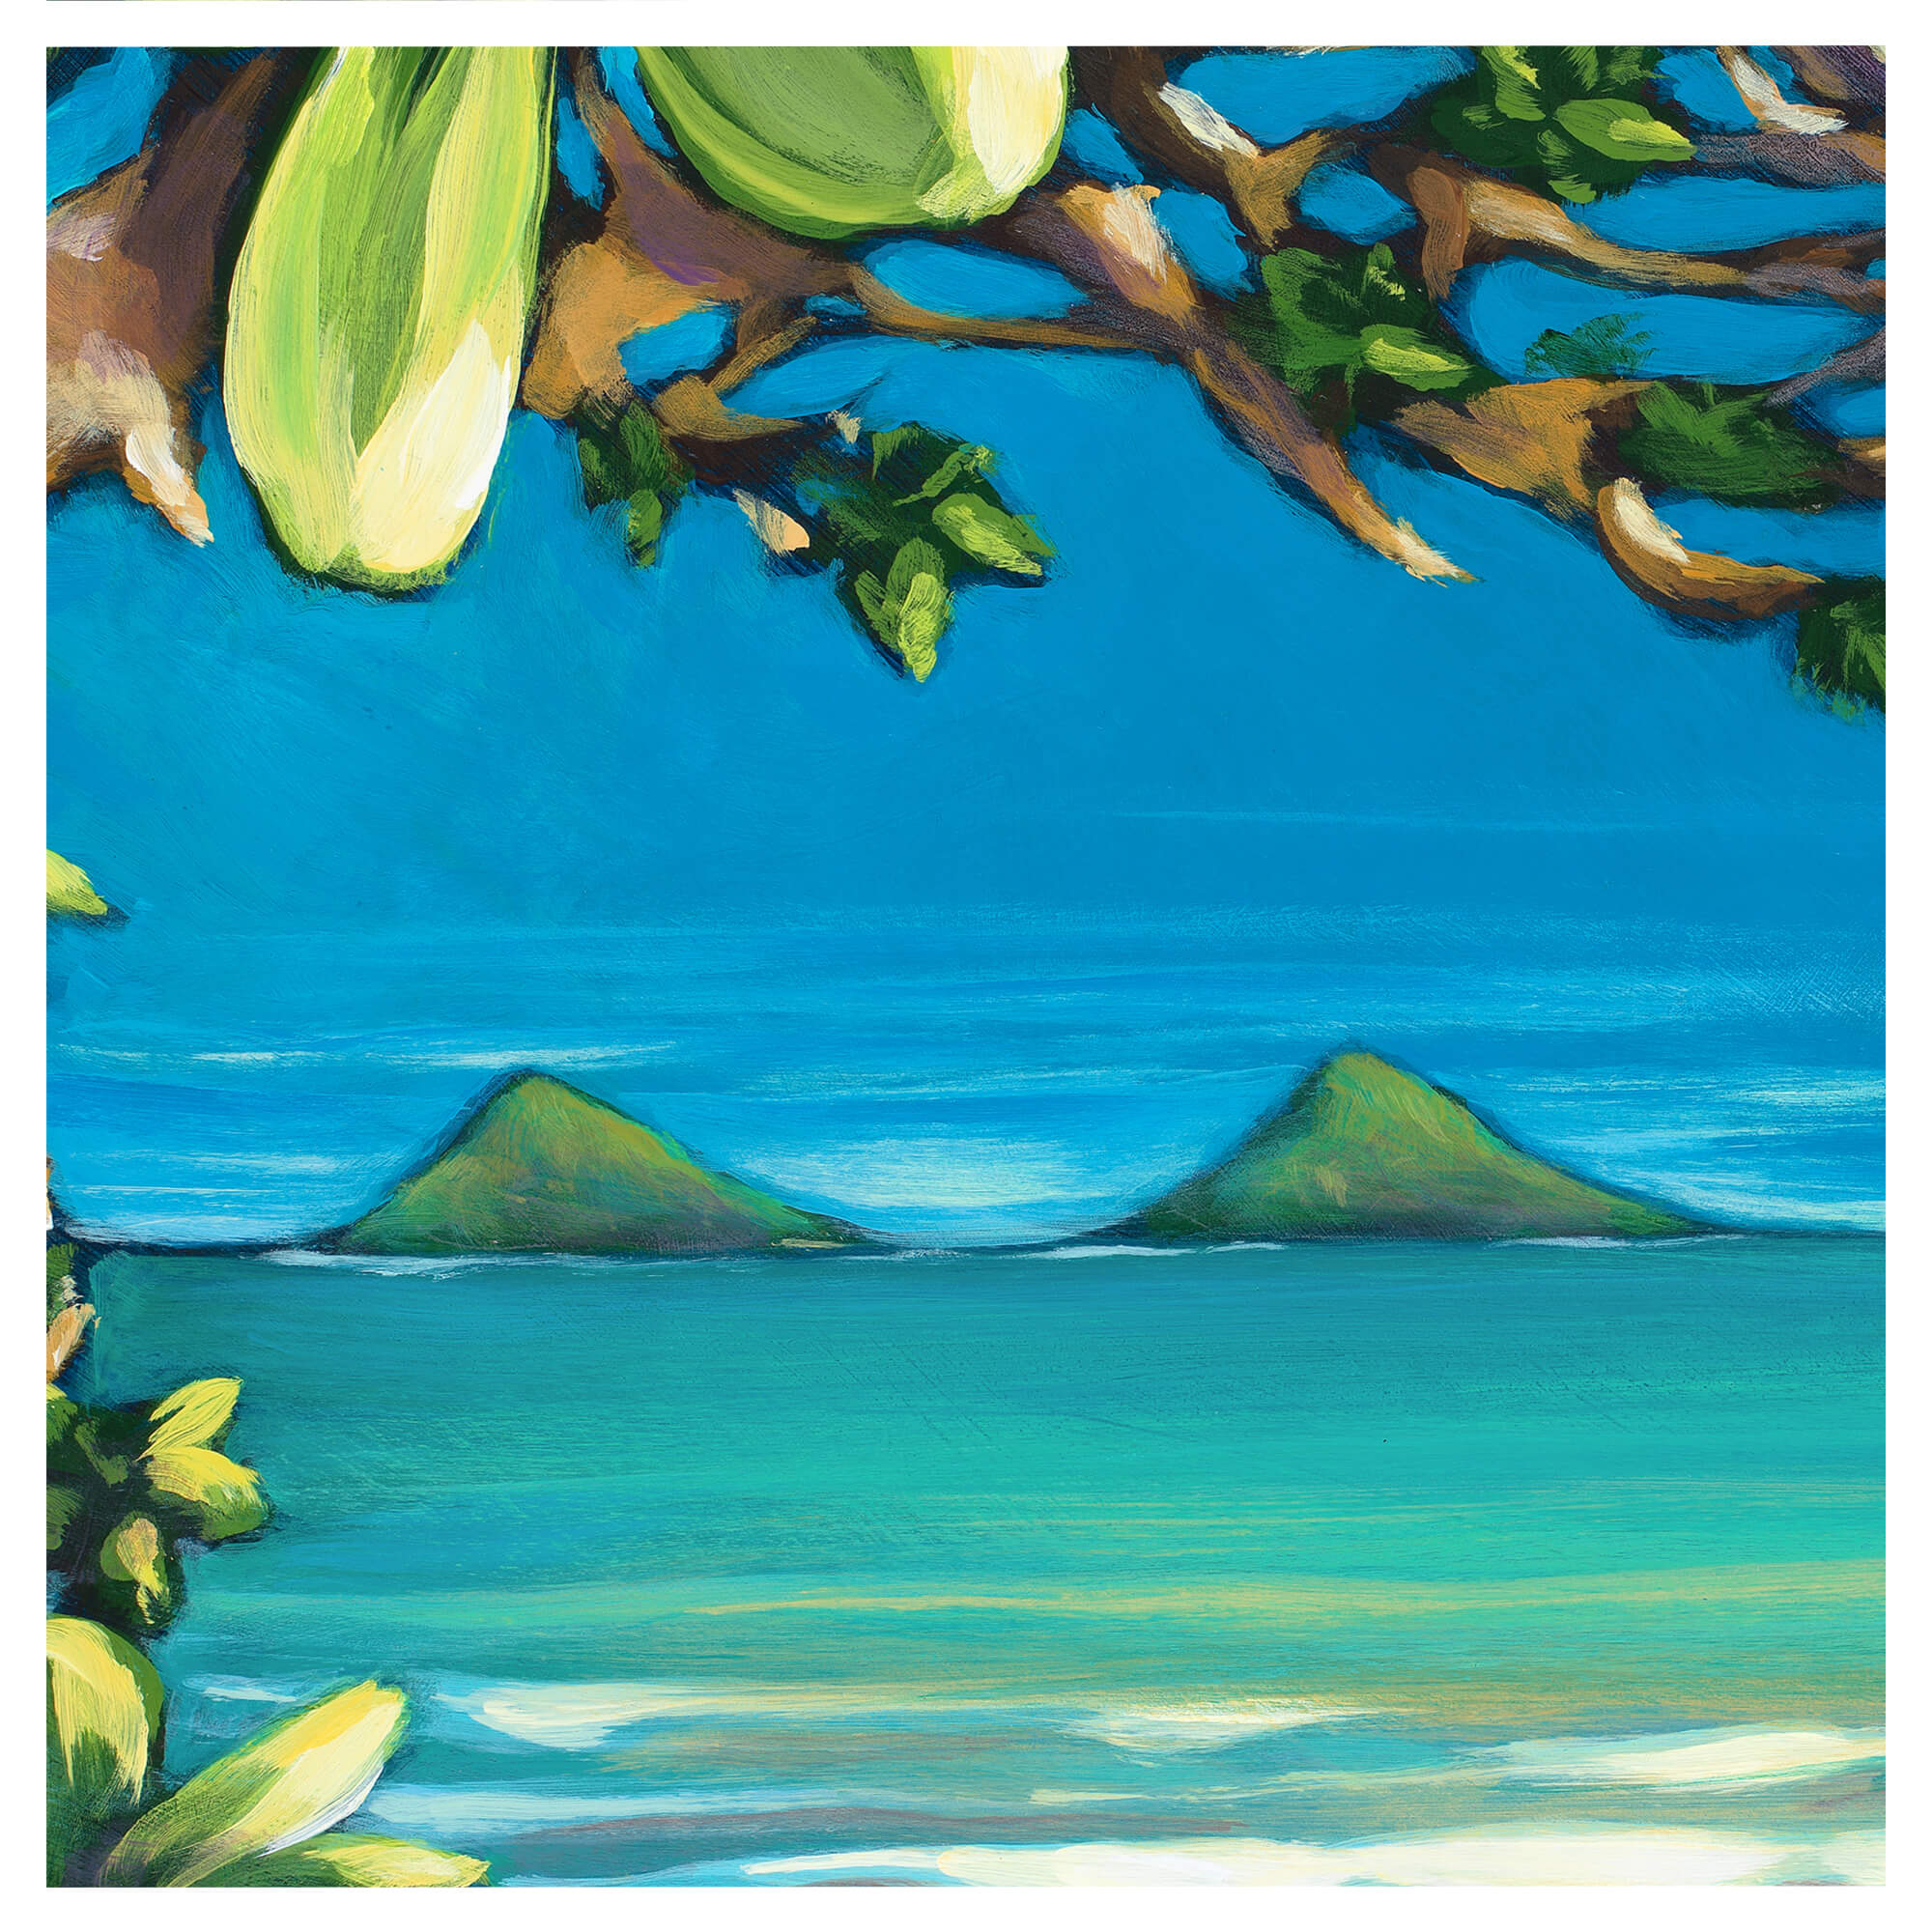 An illustration of a mountain in the sea by hawaii artist Kristi Petosa